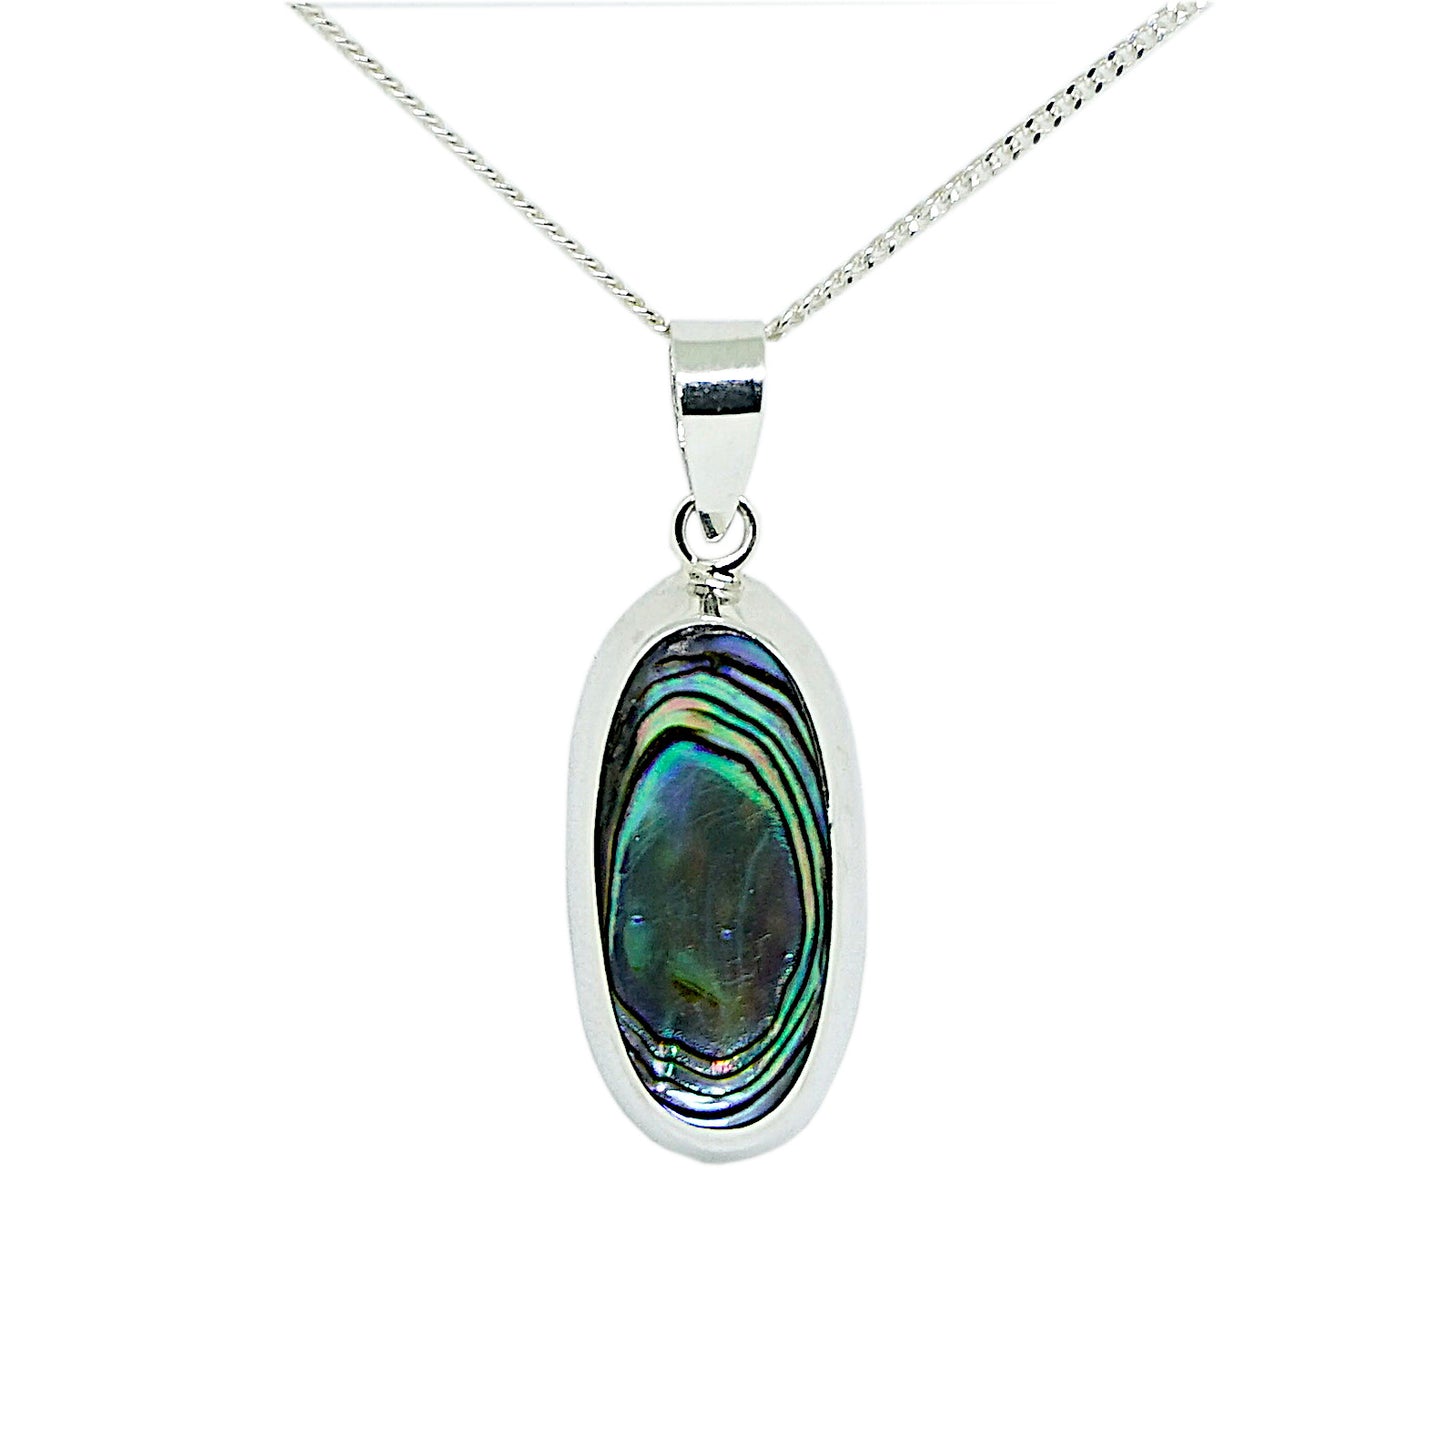 Abalone Shell Sterling Silver Pendant and Chain